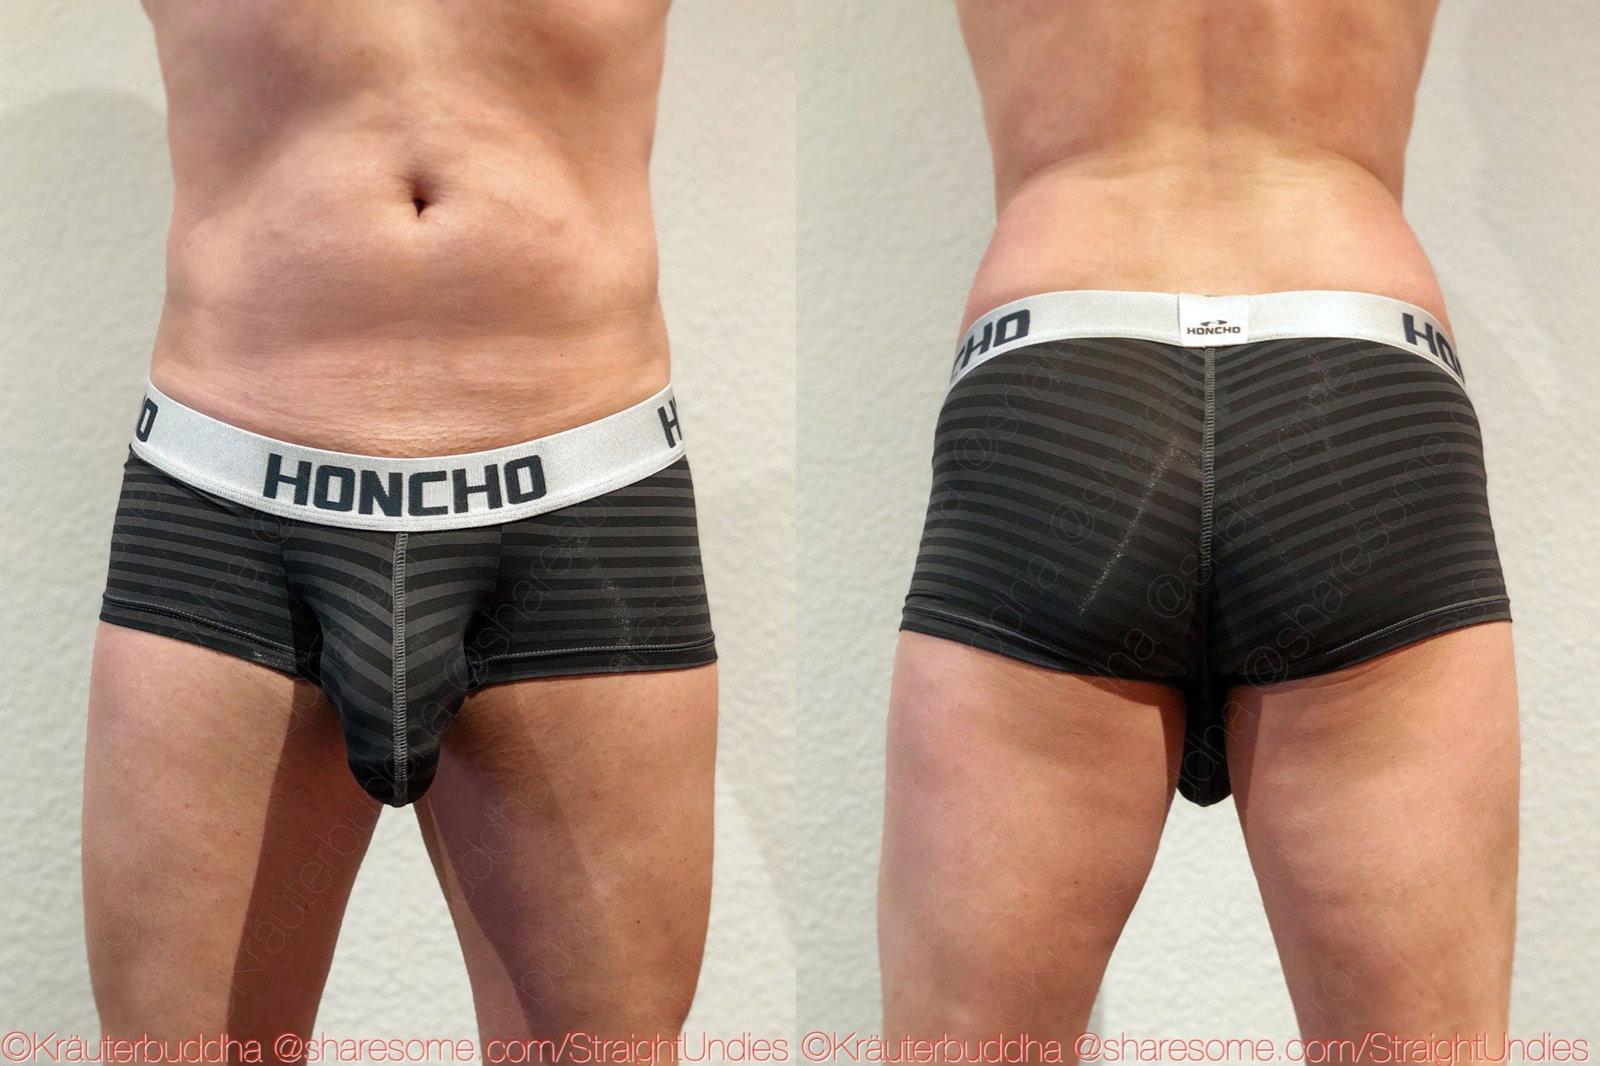 Photo by Kräuterbuddha with the username @StraightUndies, who is a verified user,  January 7, 2019 at 5:32 PM. The post is about the topic Straight Underwear and the text says 'Honcho Trunks
#mensunderwear #underwear #trunks #boxerbriefs #honcho'